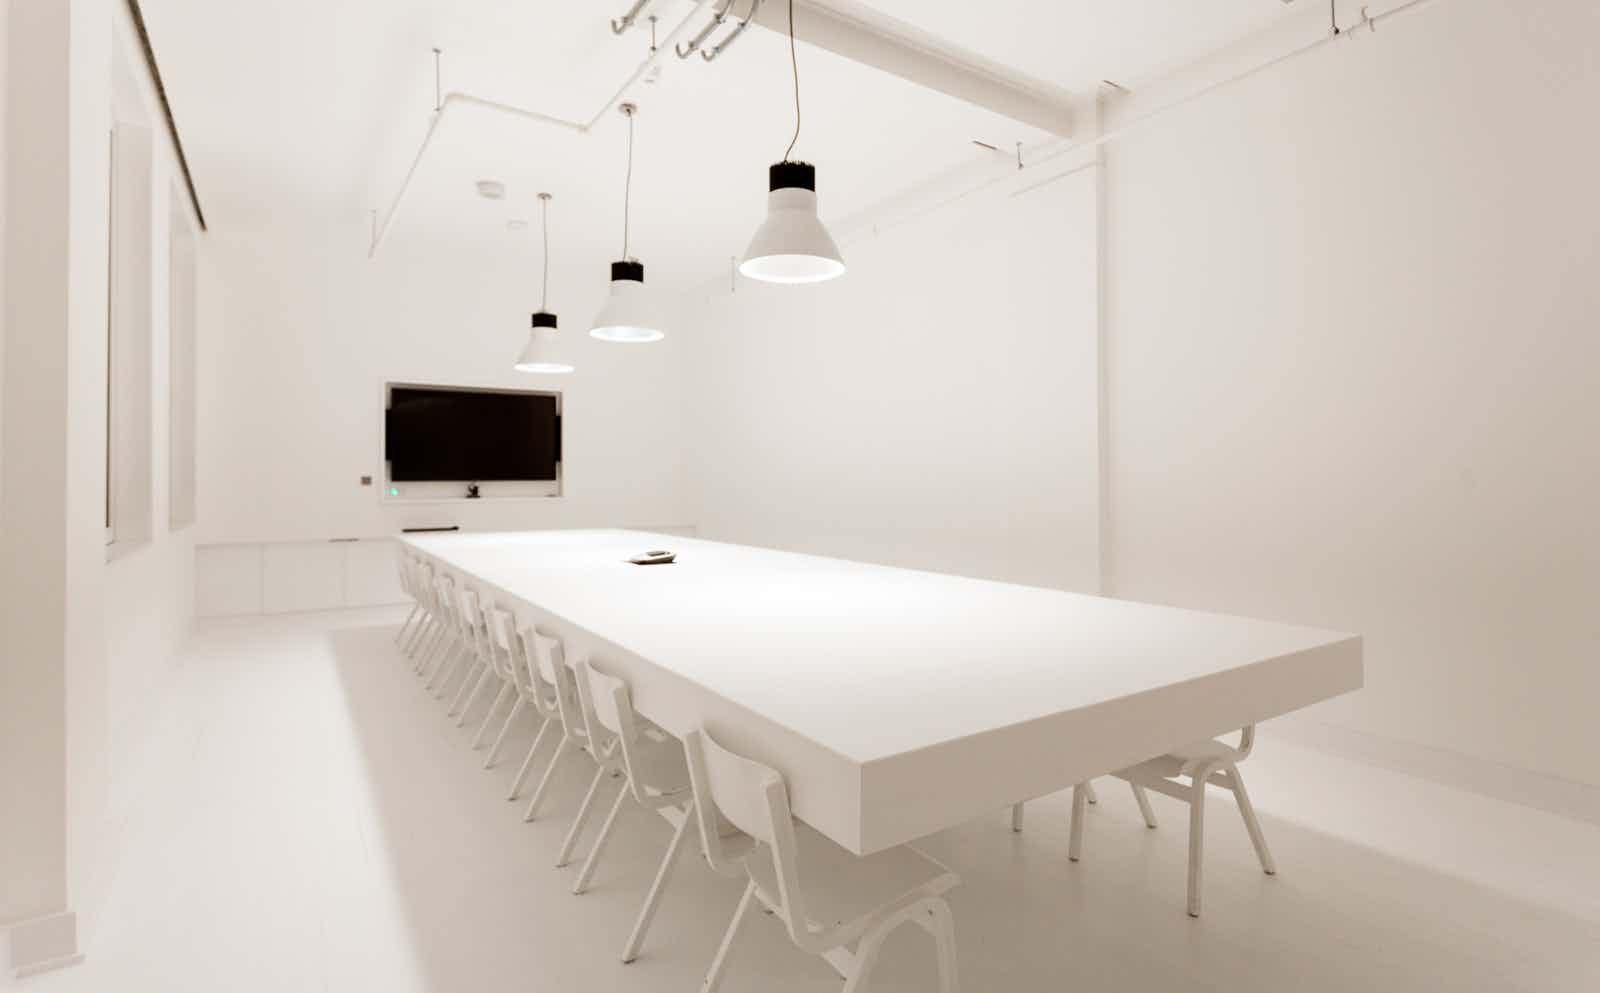 Cupertino Meeting Room, Huckletree Shoreditch